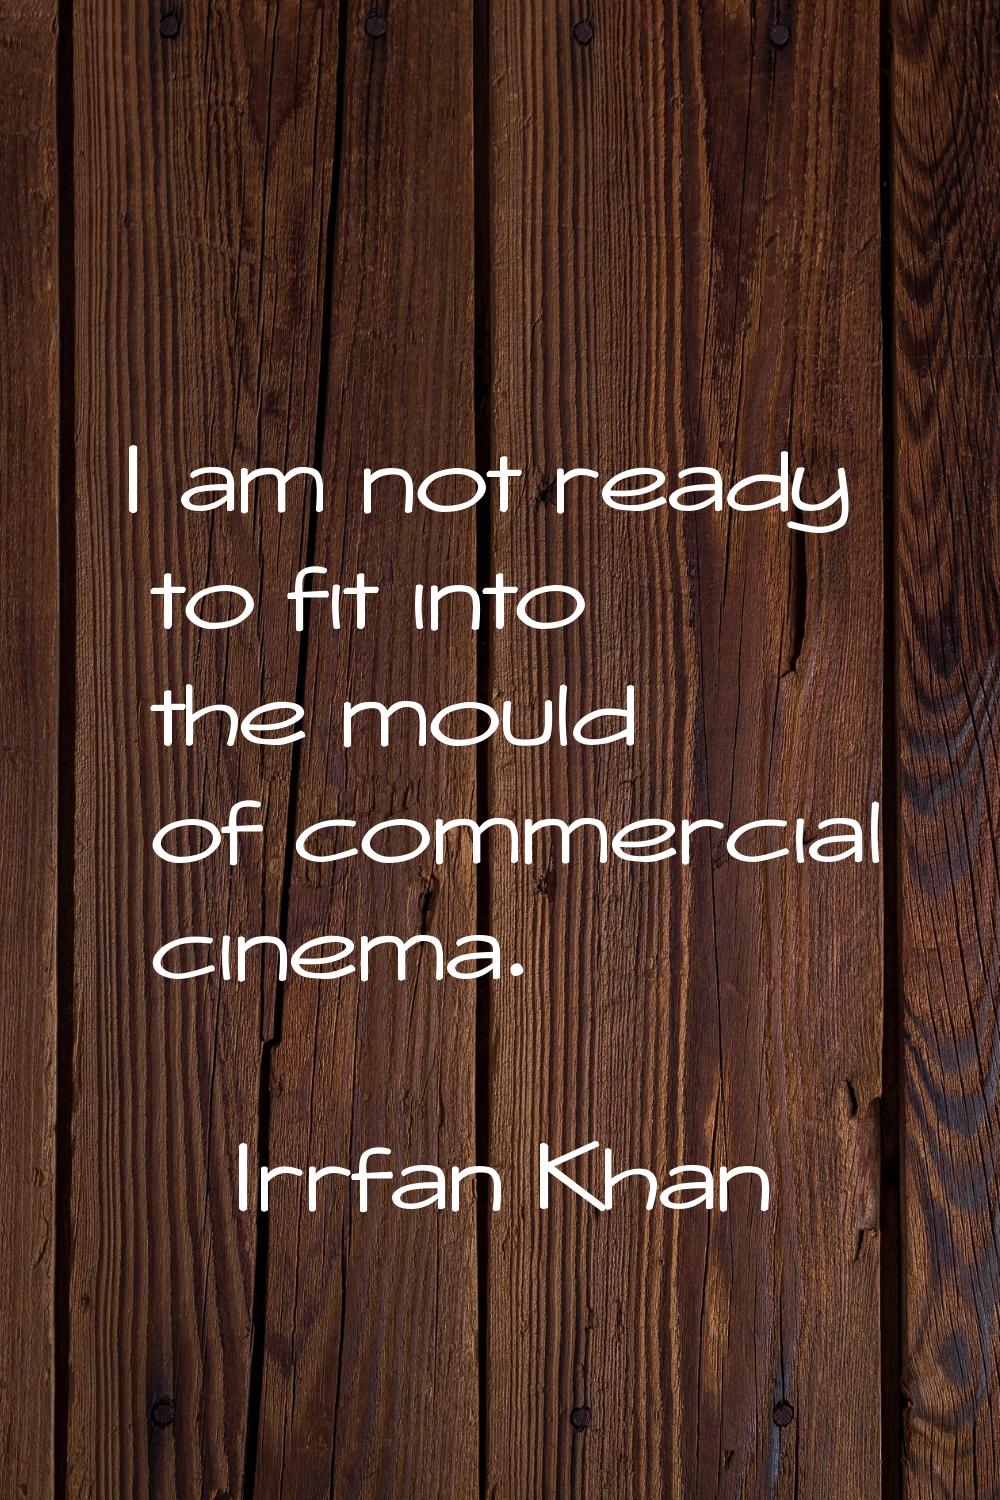 I am not ready to fit into the mould of commercial cinema.